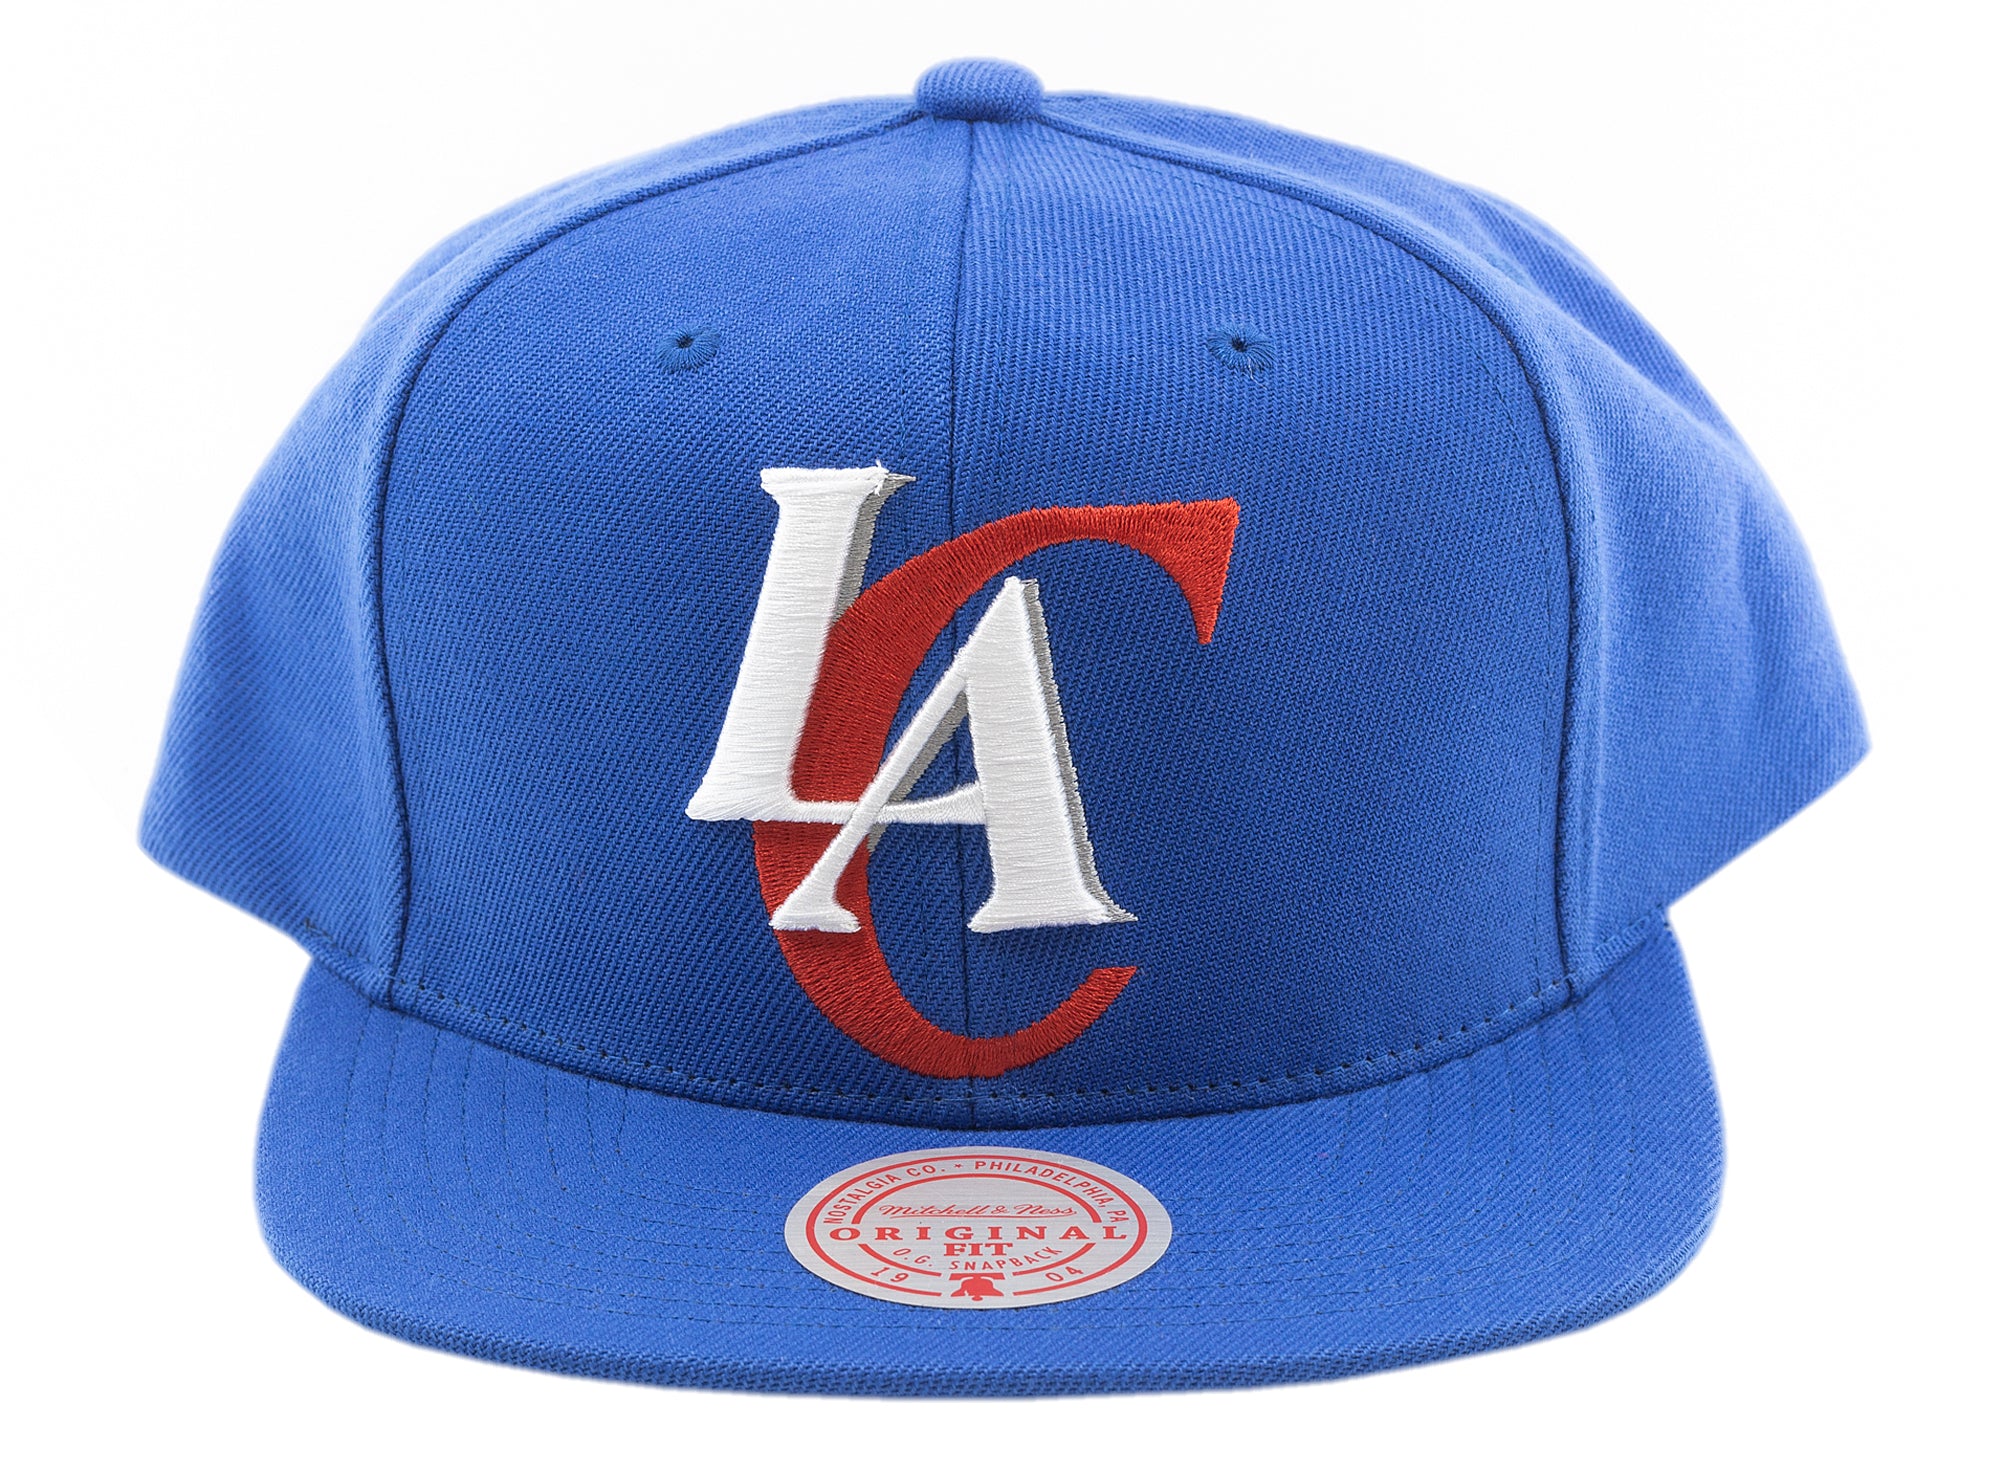 Los Angeles CLIPPERS VV24Z NBA Mitchell & Ness Cap